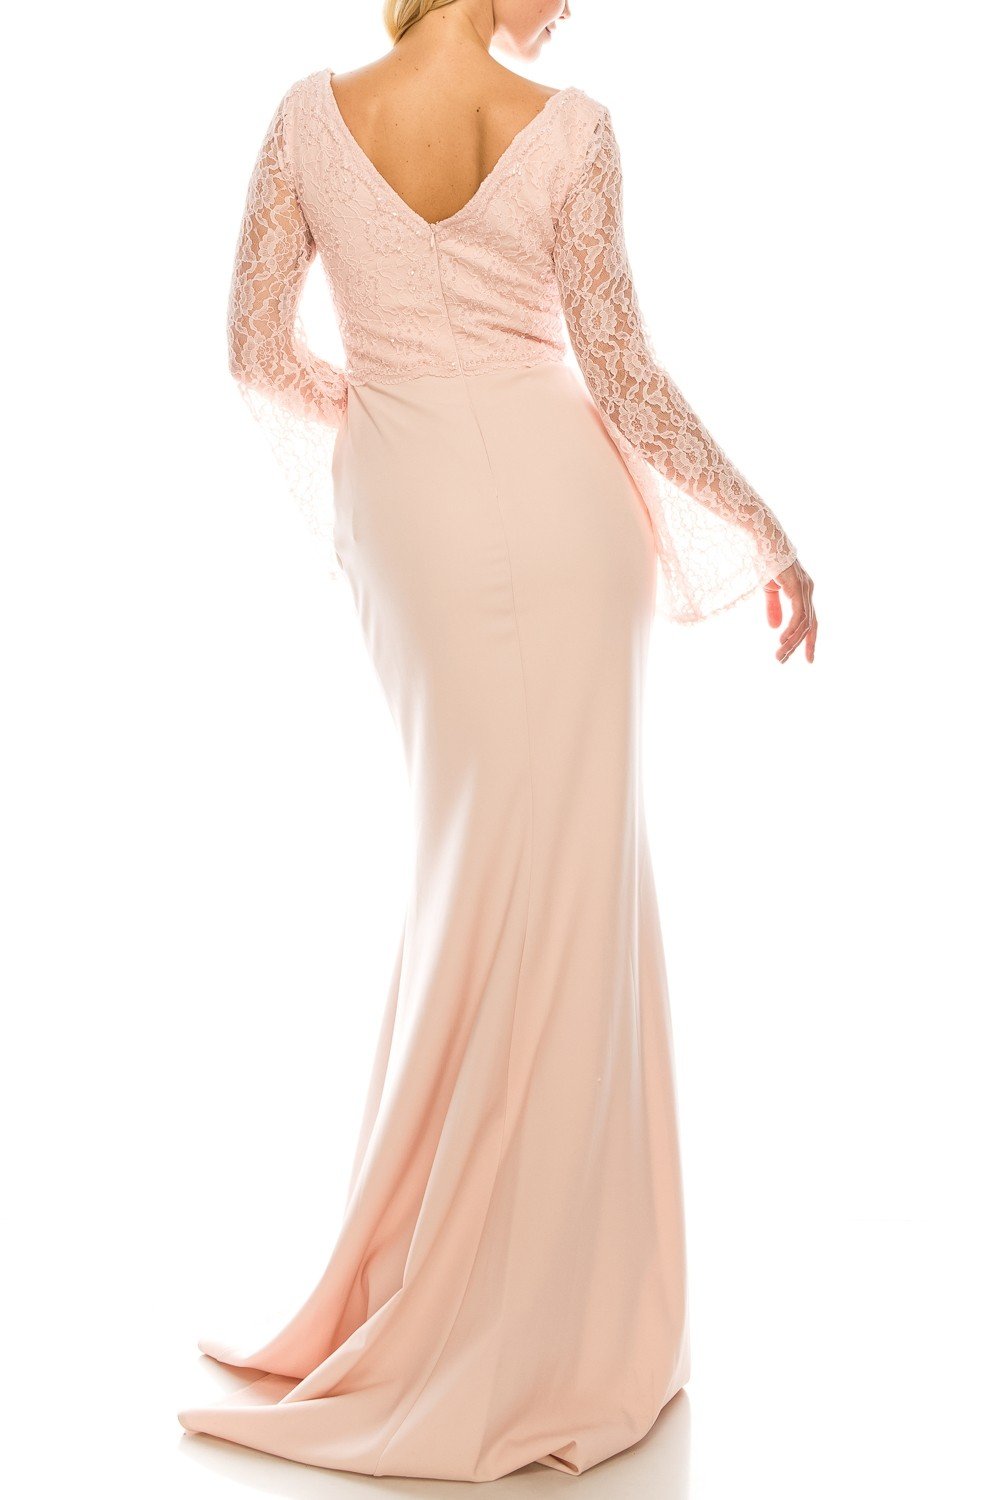 Odrella - 4619B Long Sleeve Beaded Lace Trumpet Gown In Pink